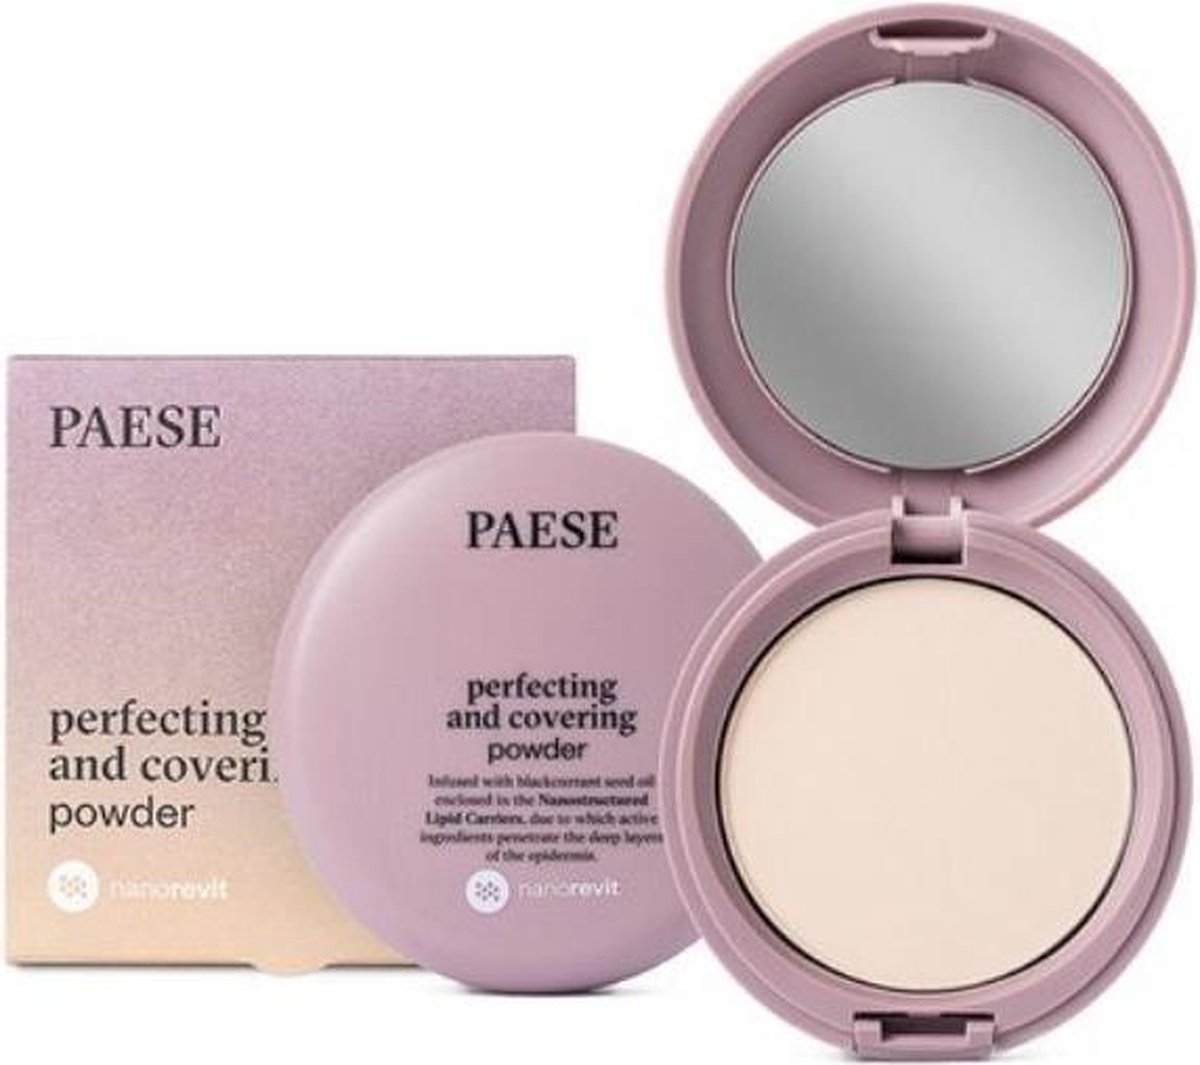 Paese - Nanorevit Perfecting And Covering Powder Powder 01 Ivory 9G